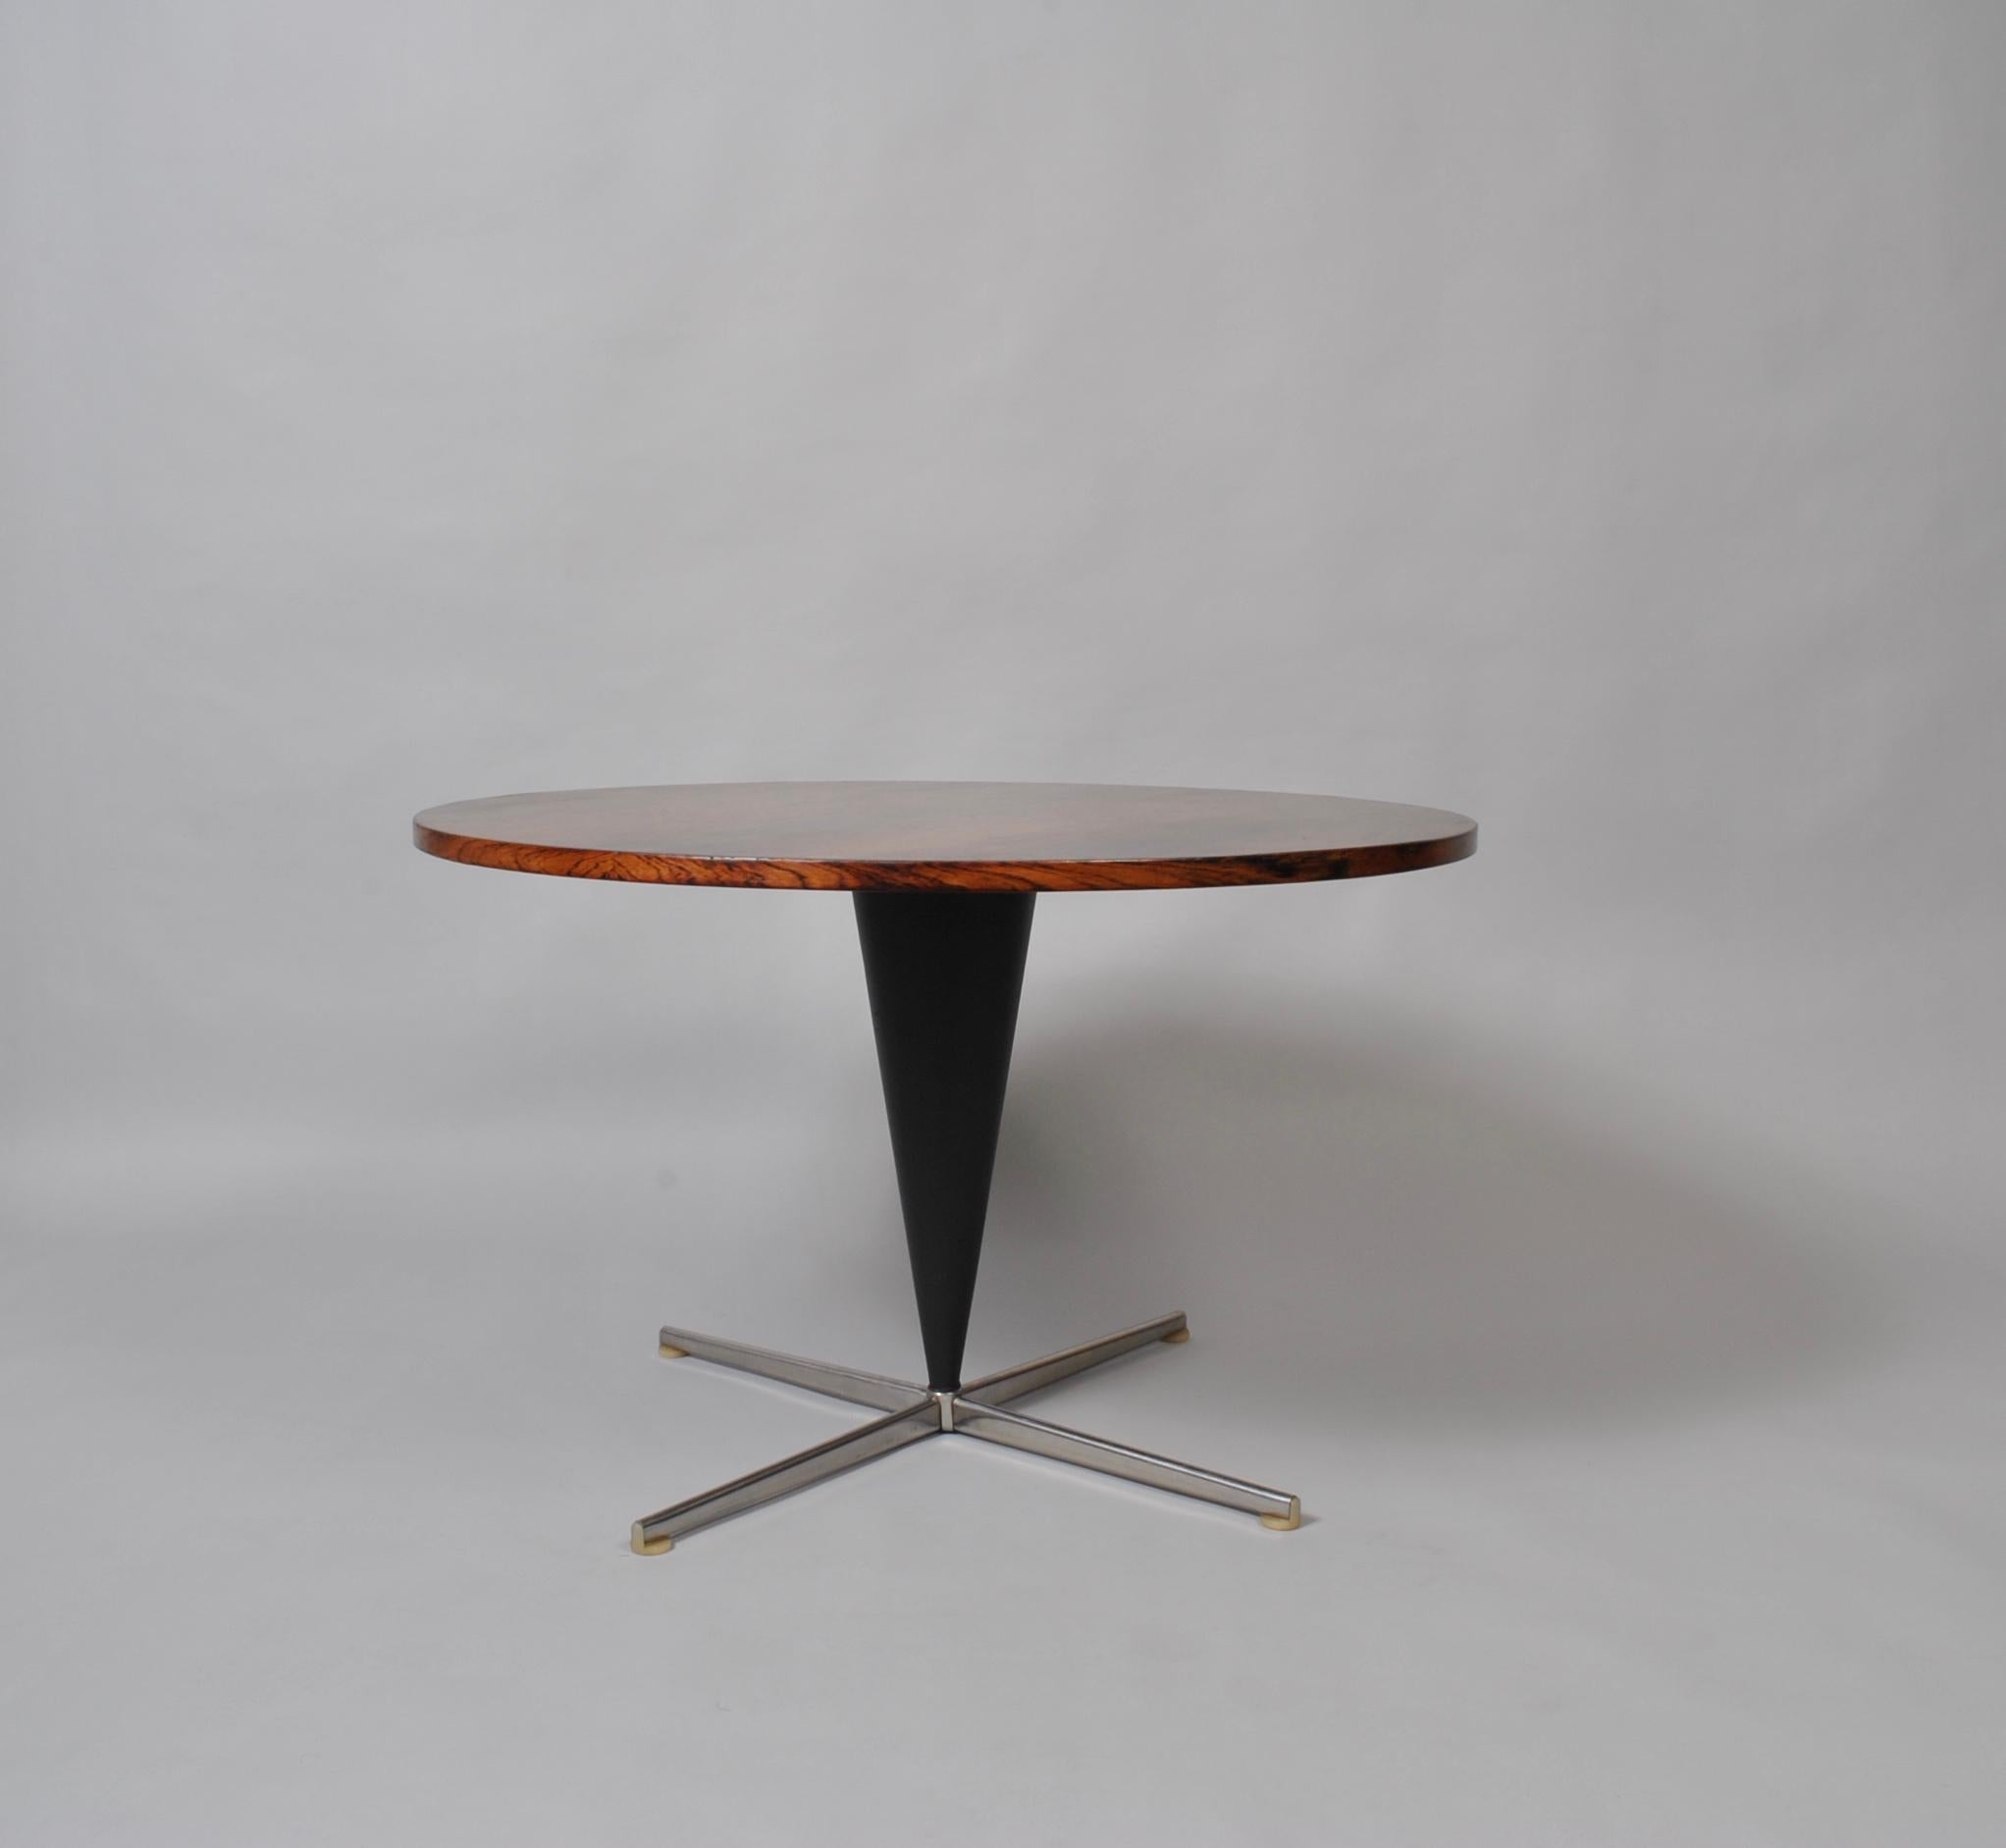 A very rare original 1958 cone table by Verner Panton. Lovely figured, varied and grained hardwood surface, leather covered cone to aluminium feet base, with Danish furniture control stamp intact verso.
Superb piece of midcentury design history.